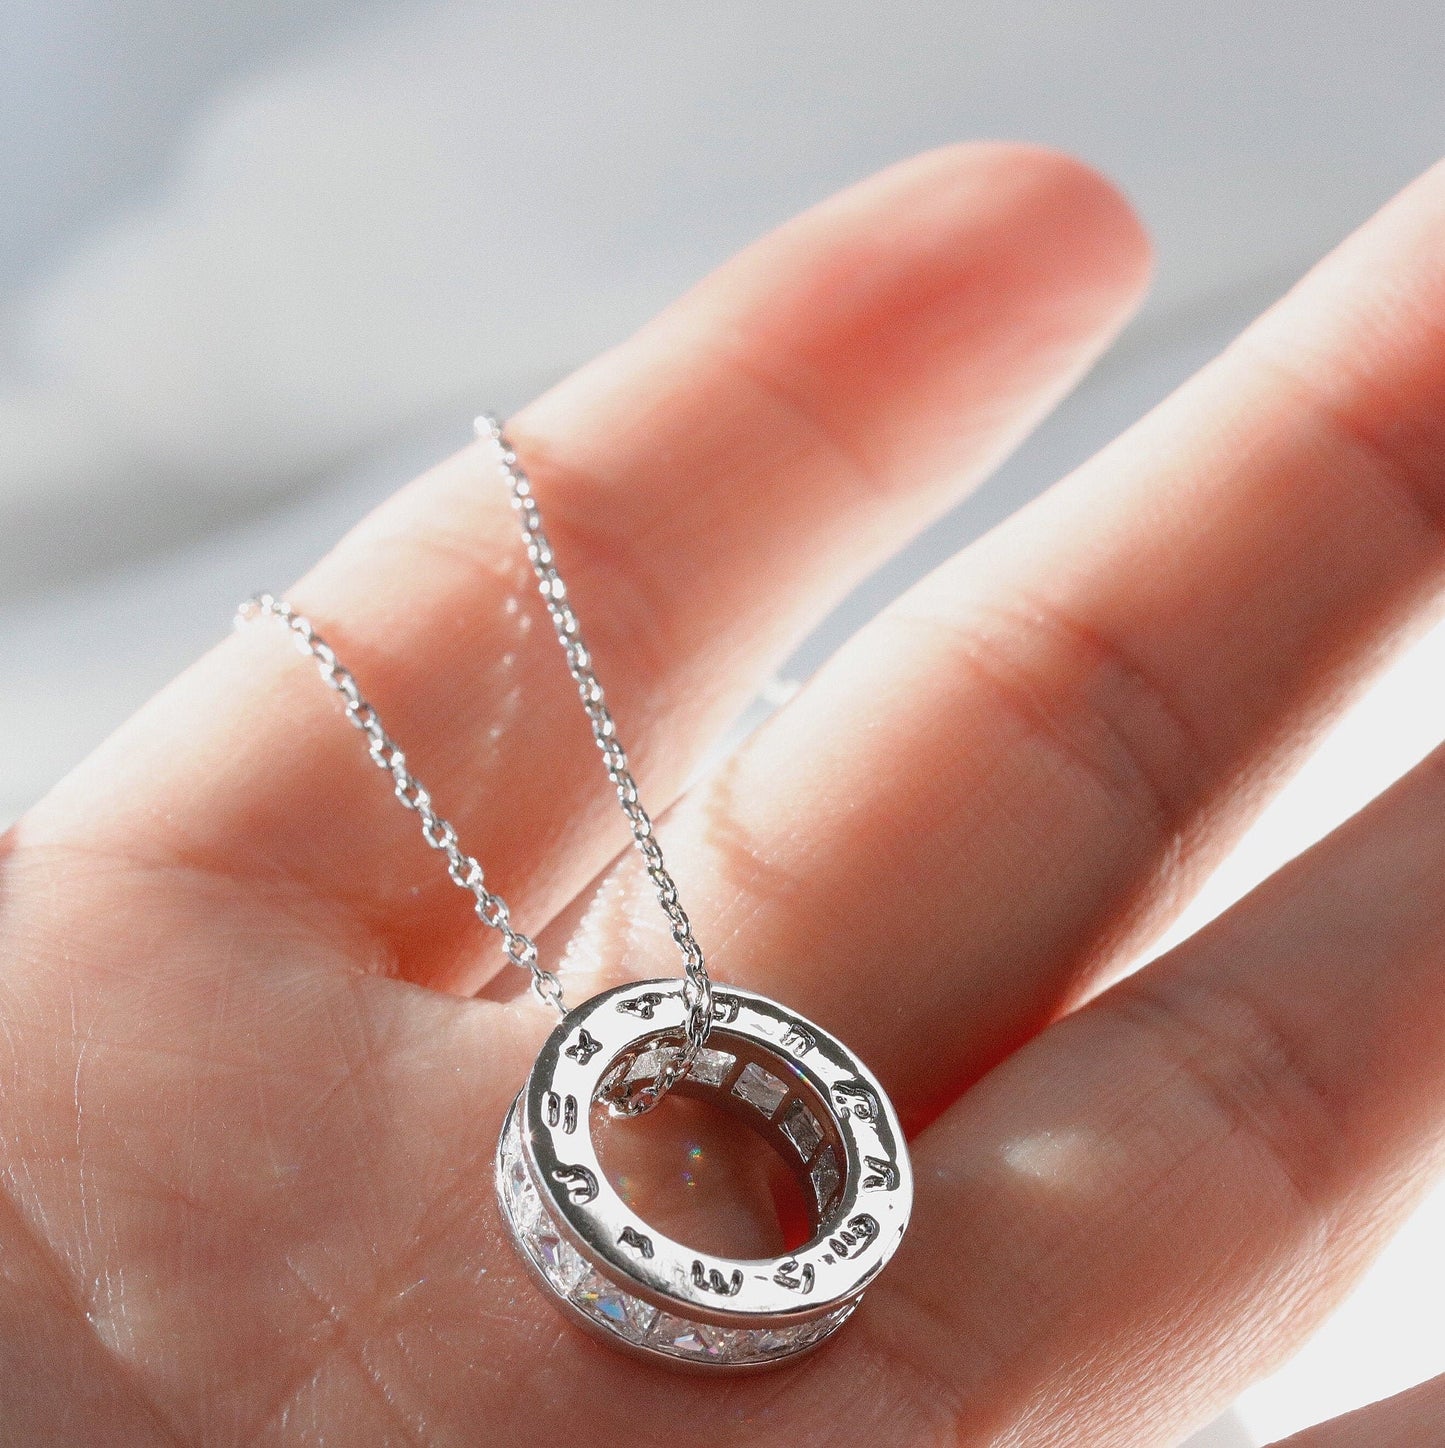 Sister Gift Necklace, Open Circle Charm Necklace in Silver / Rose Gold / Gold, Best Sister Gift/ Little Sister Big Sister Birthday Gift